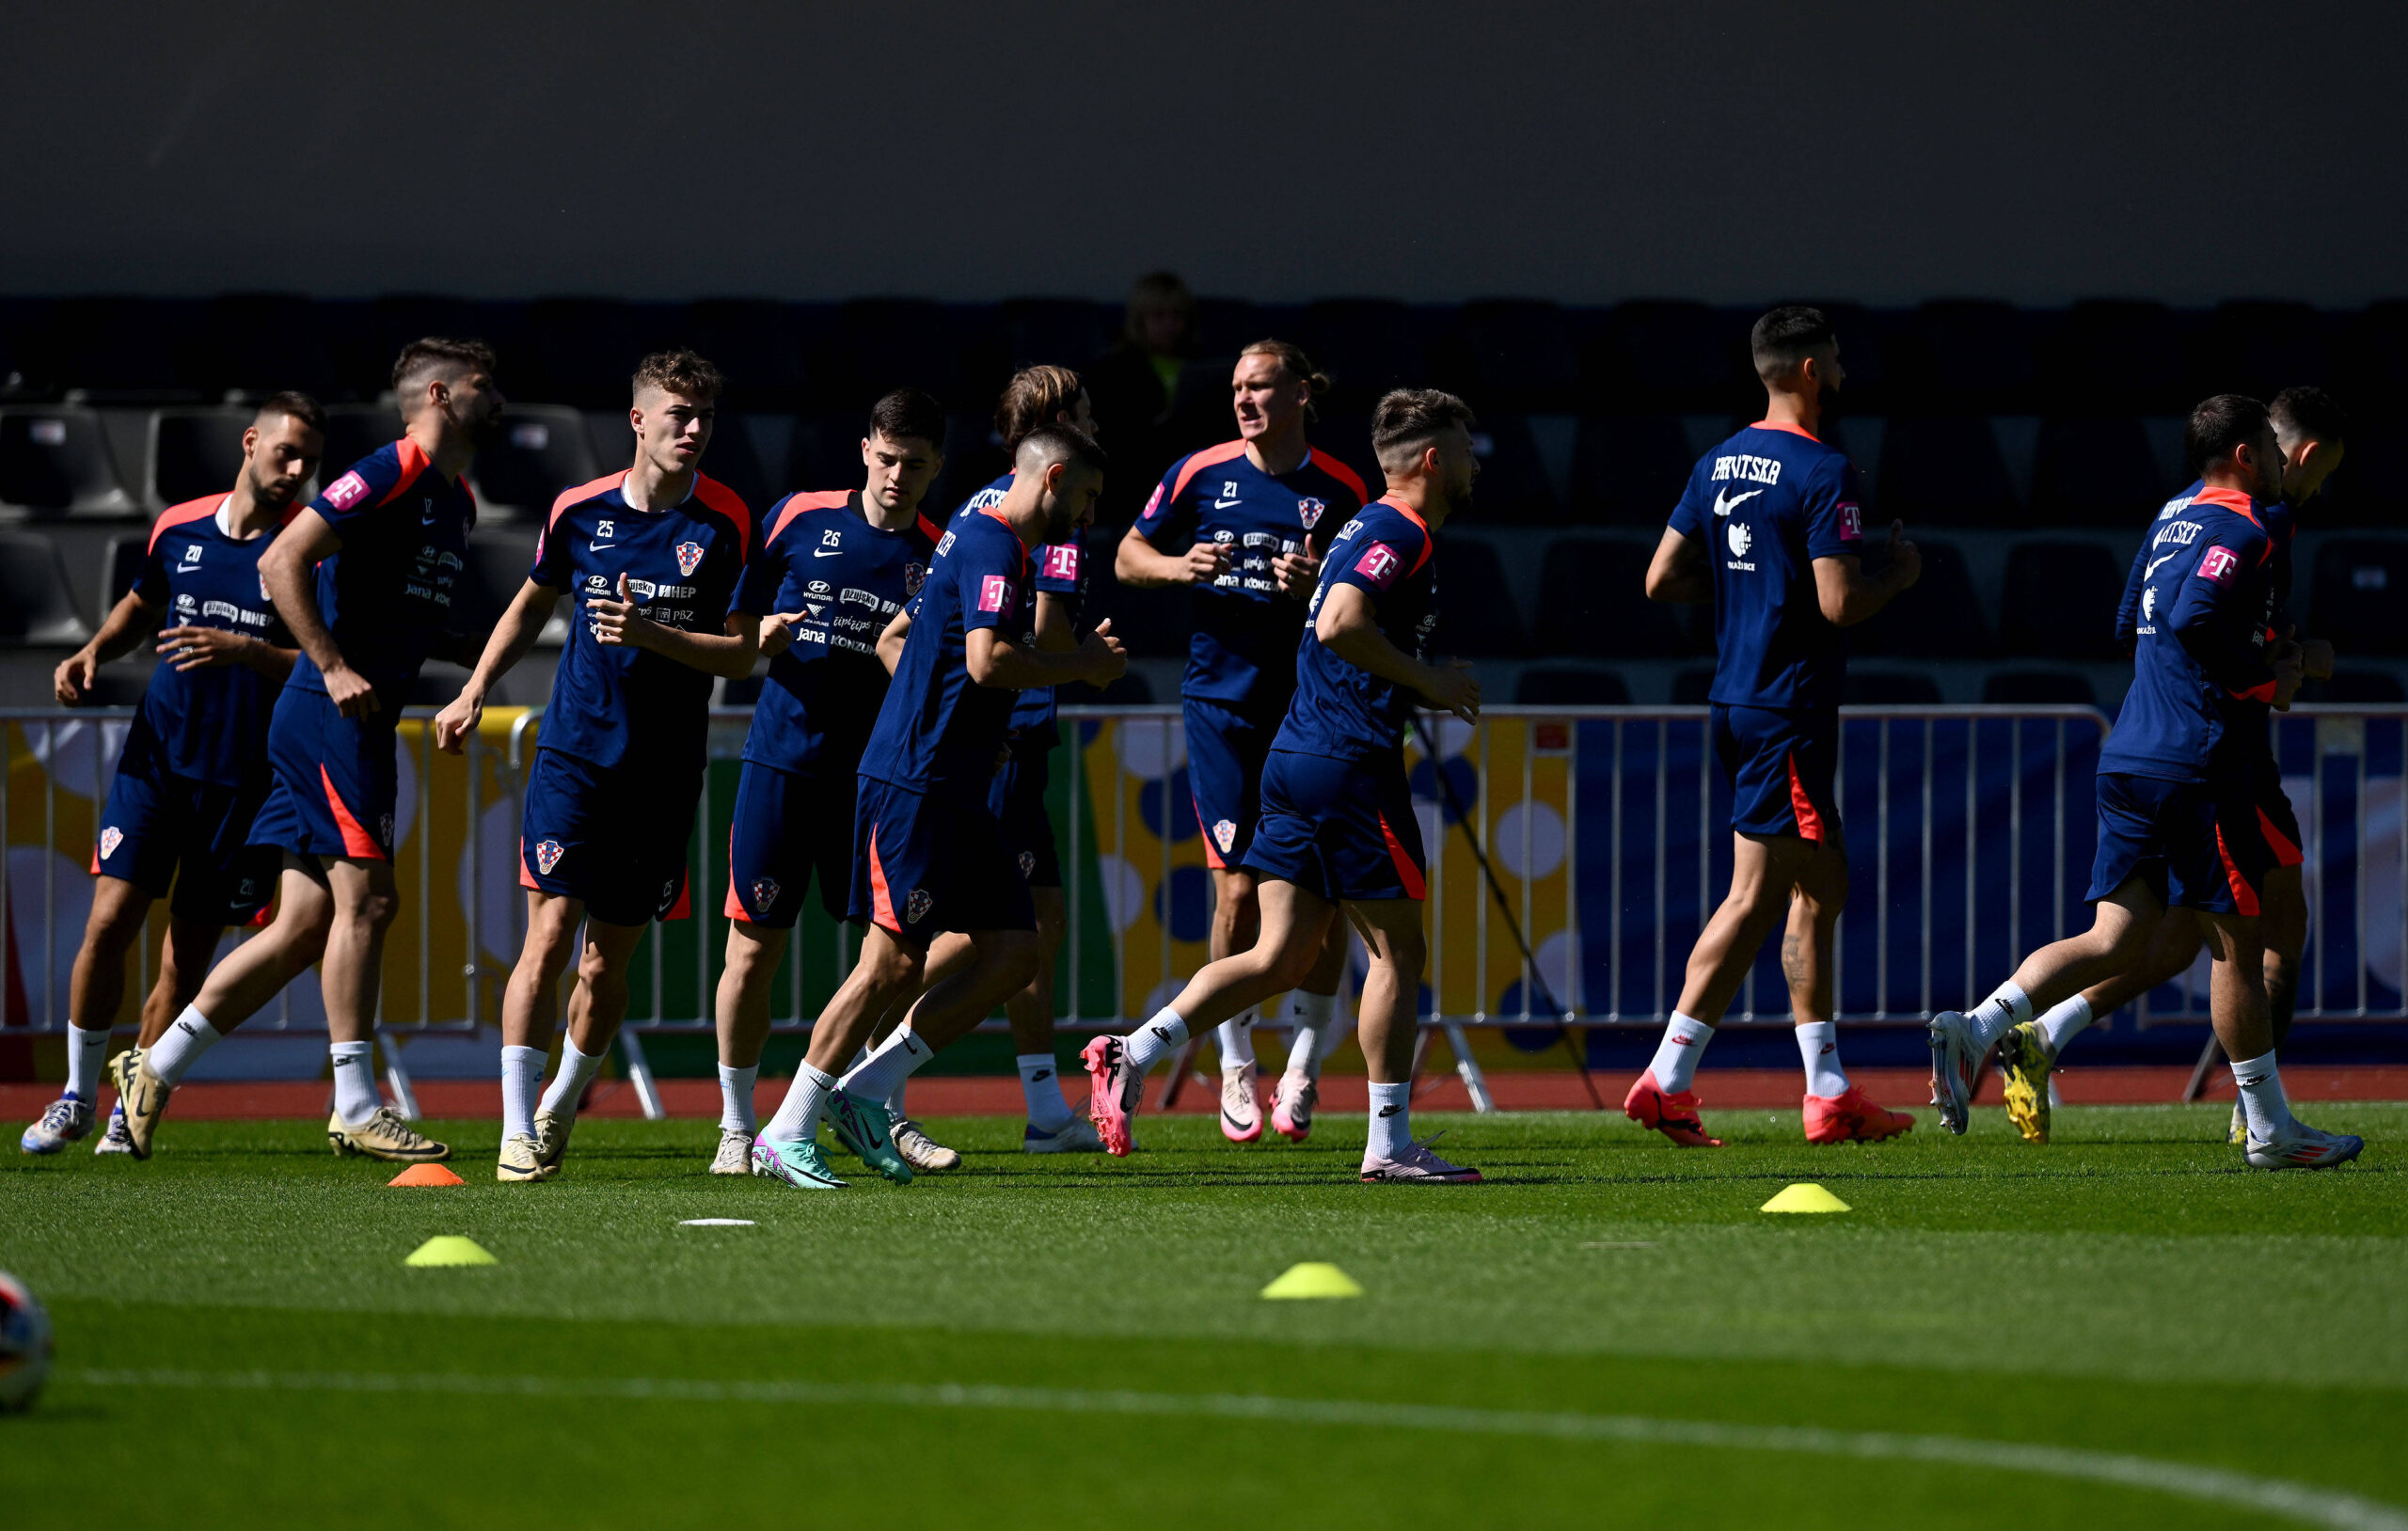 Croatian team practicing during the Euros